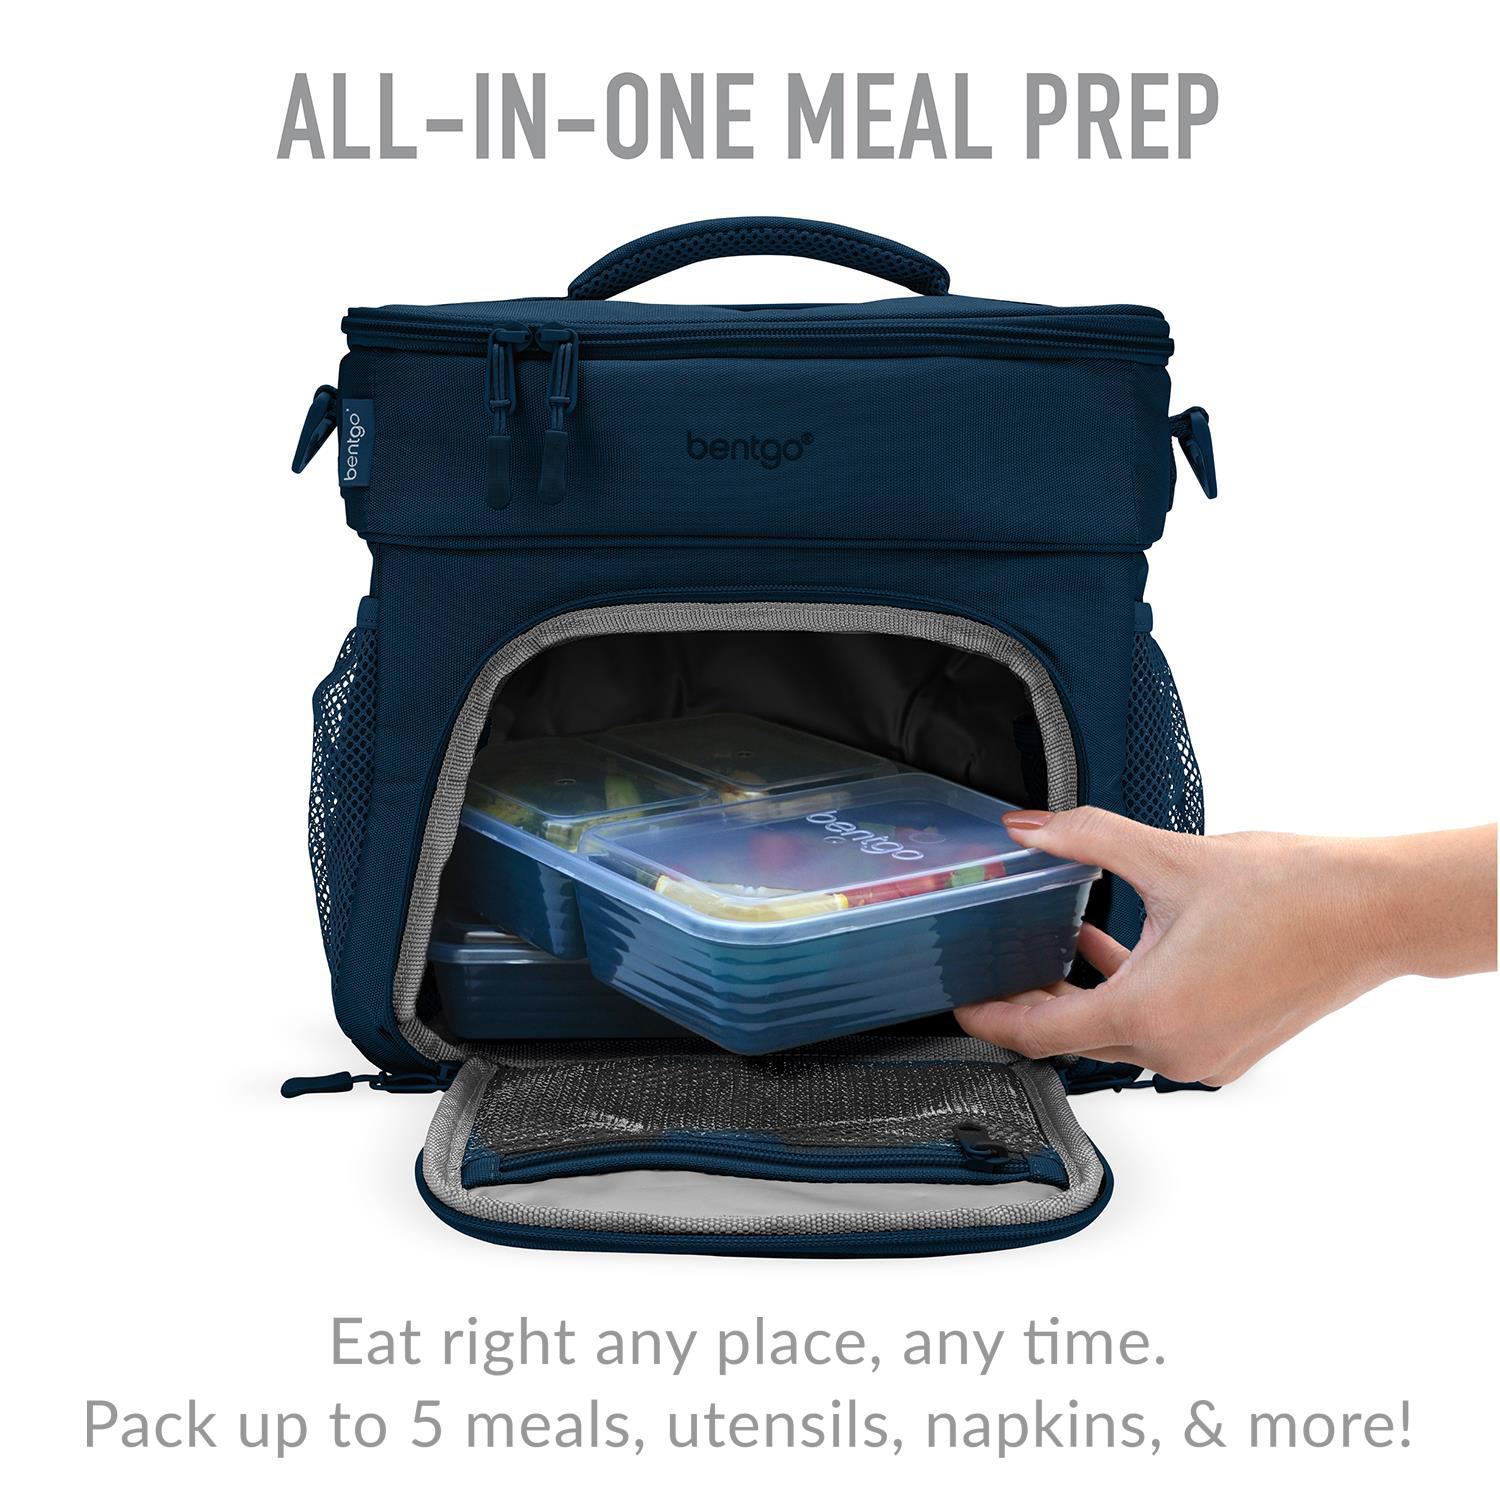 https://bigbigmart.com/wp-content/uploads/2022/07/Bentgo%C2%AE-Prep-Deluxe-Multimeal-Bag-Premium-Insulation-up-to-8-Hrs-with-Water-Resistant-Exterior-Interior-Extra-Large-Lunch-Bag-Holds-4-Meals-Snacks-Great-for-All-Day-Meal-Prep-Navy-Blue2.jpg